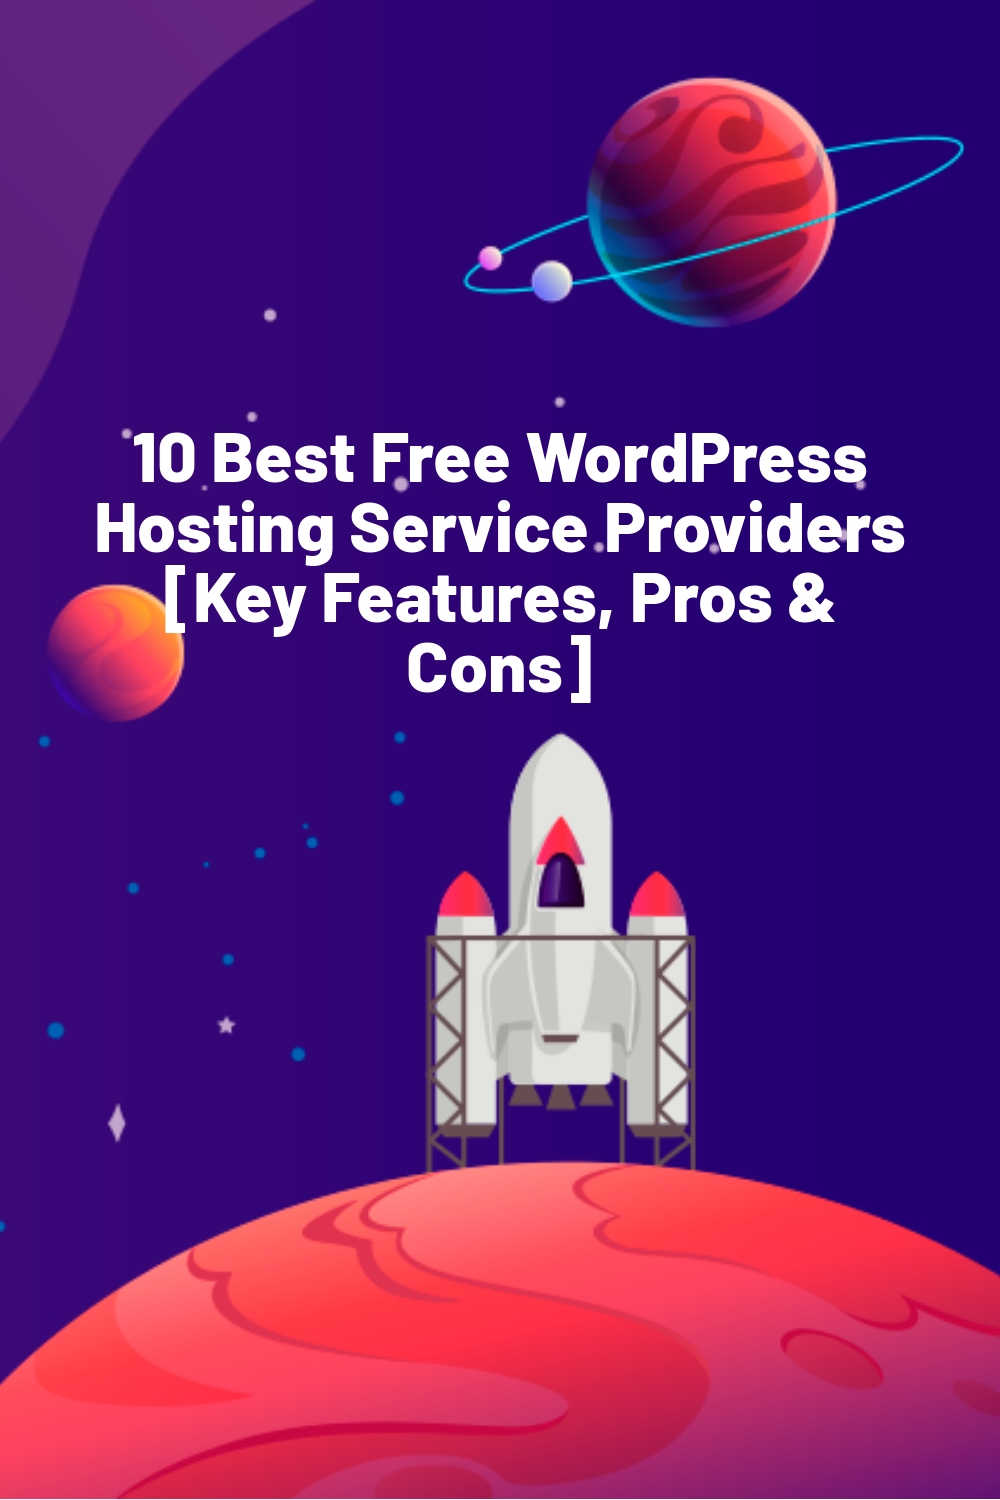 10 Best Free WordPress Hosting Service Providers [Key Features, Pros & Cons]